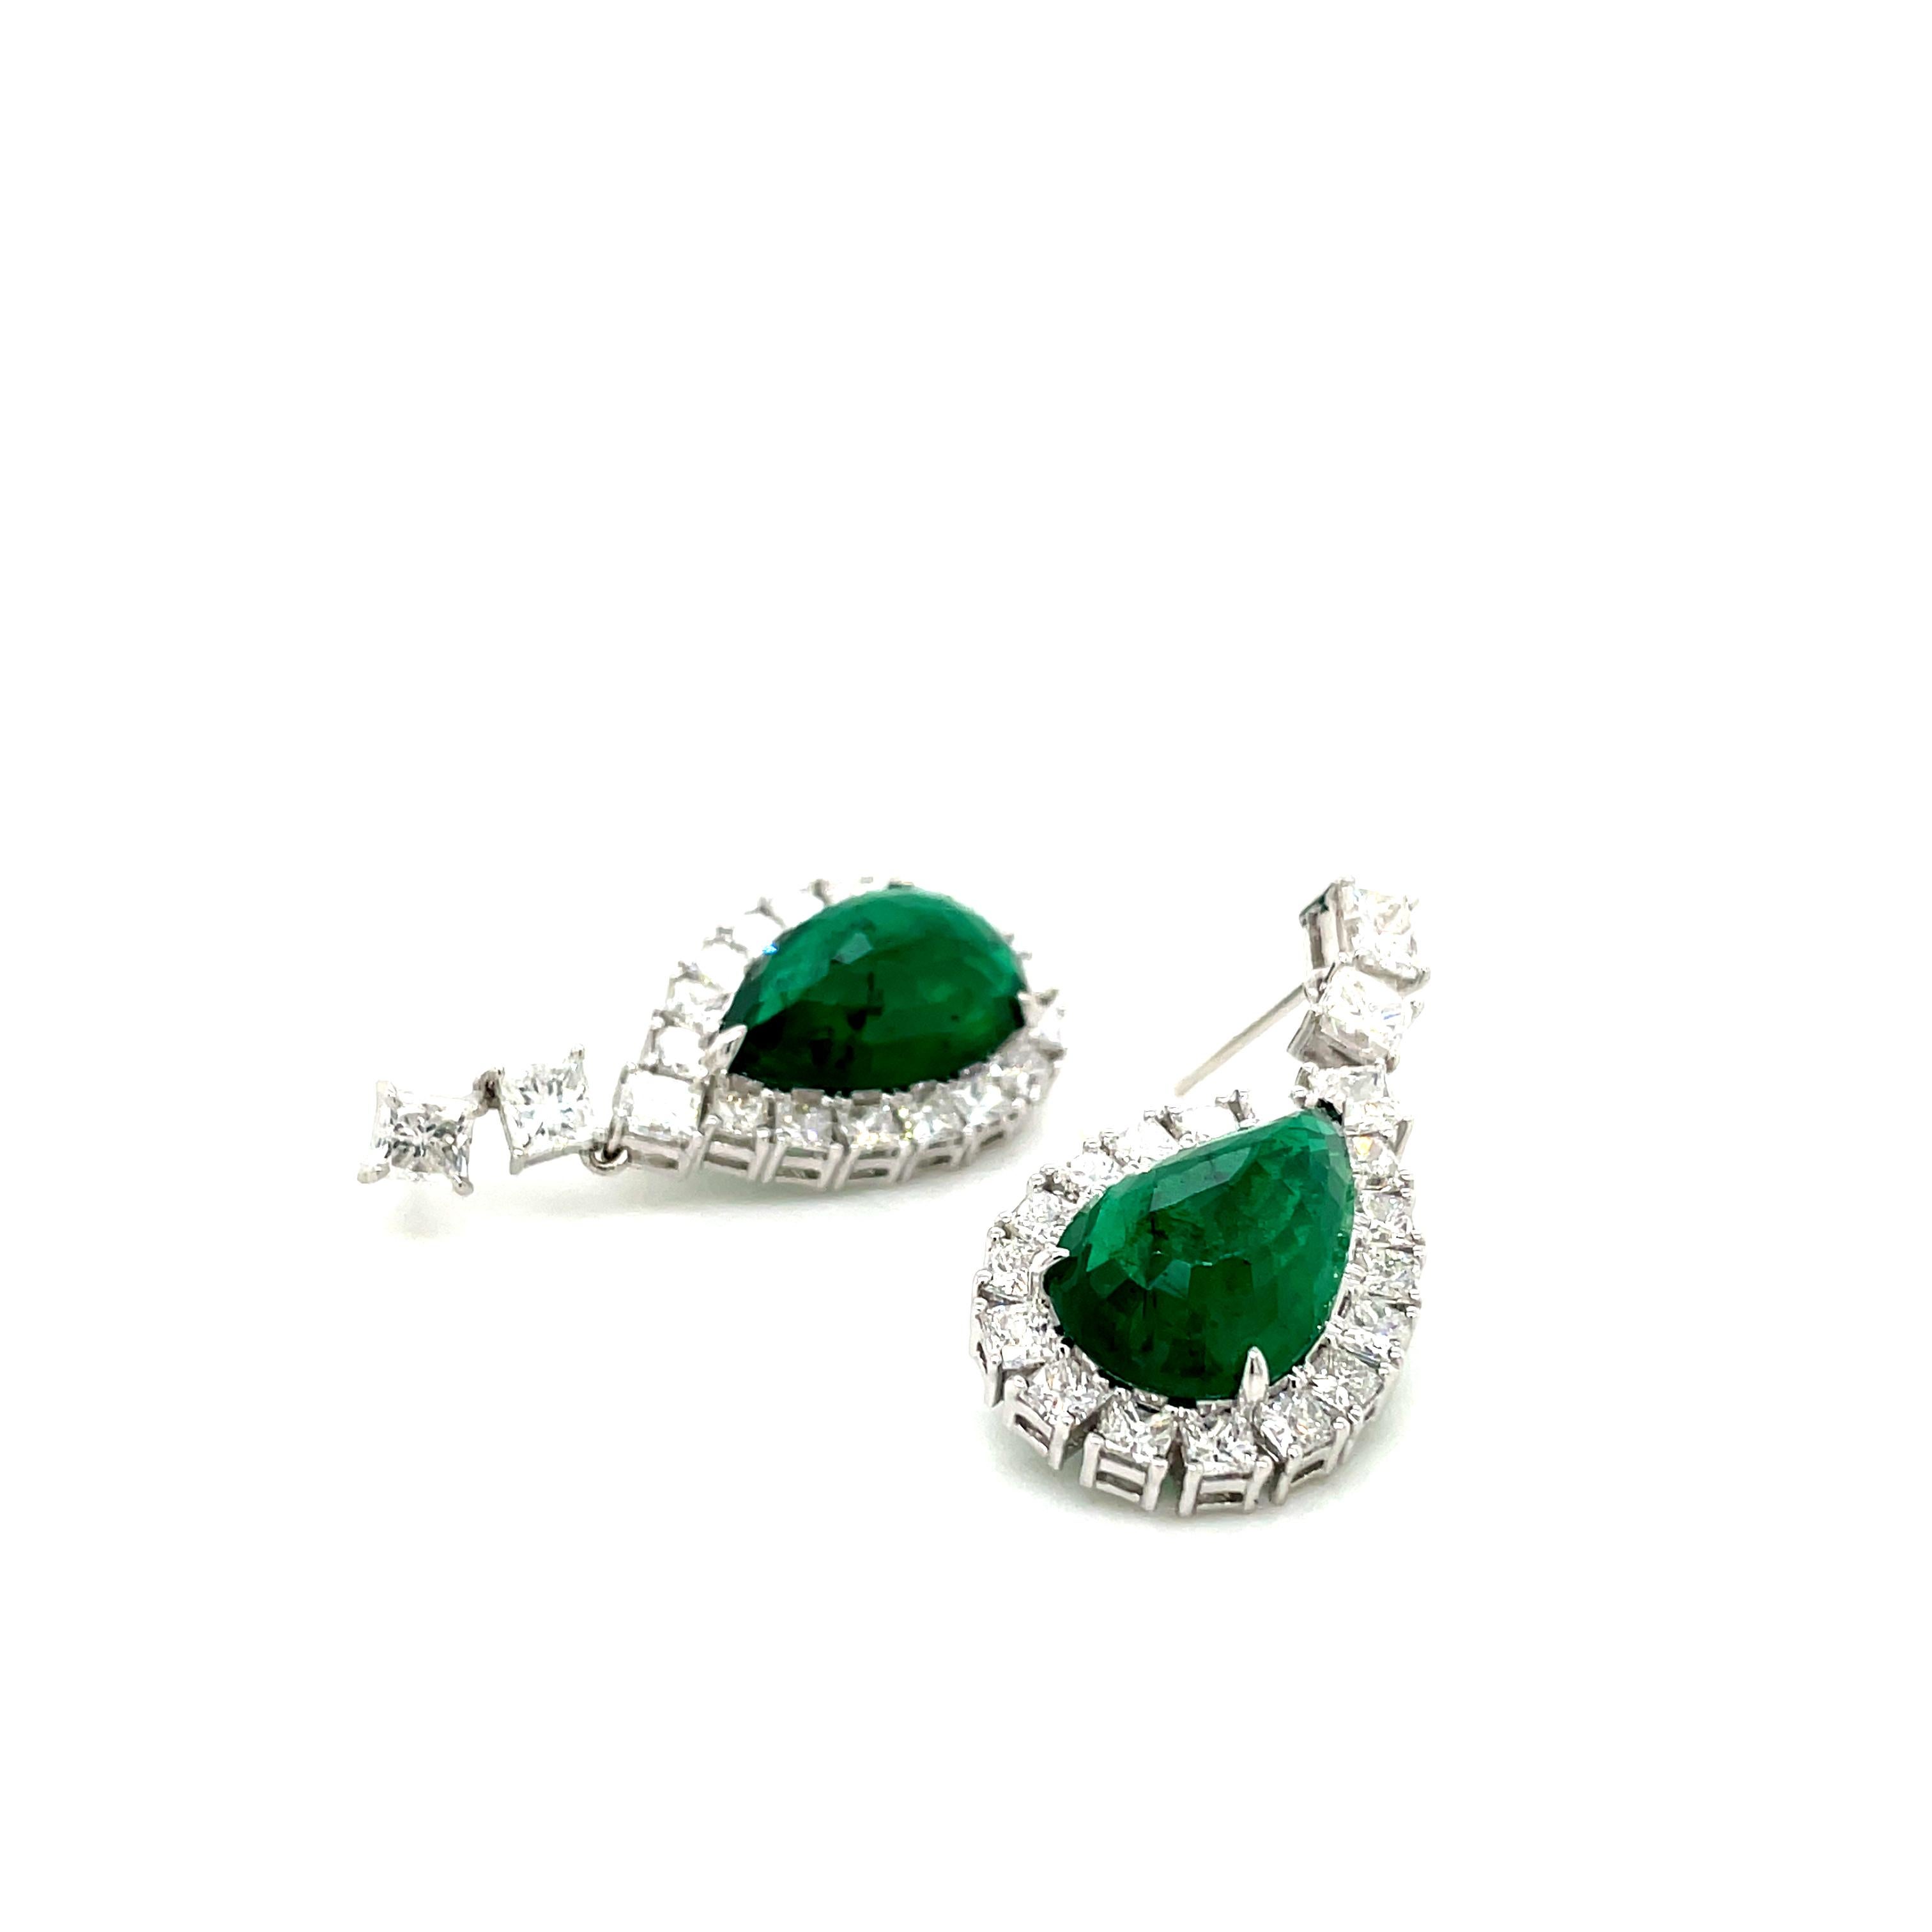 A lush green elegance meets radiant sparkle in a symphony of luxury. 

Crafted with precision and passion, these earrings boast GRS certified two pear-shaped emeralds from the renowned mines of Zambia, totaling a remarkable 10.85 carats, surrounded